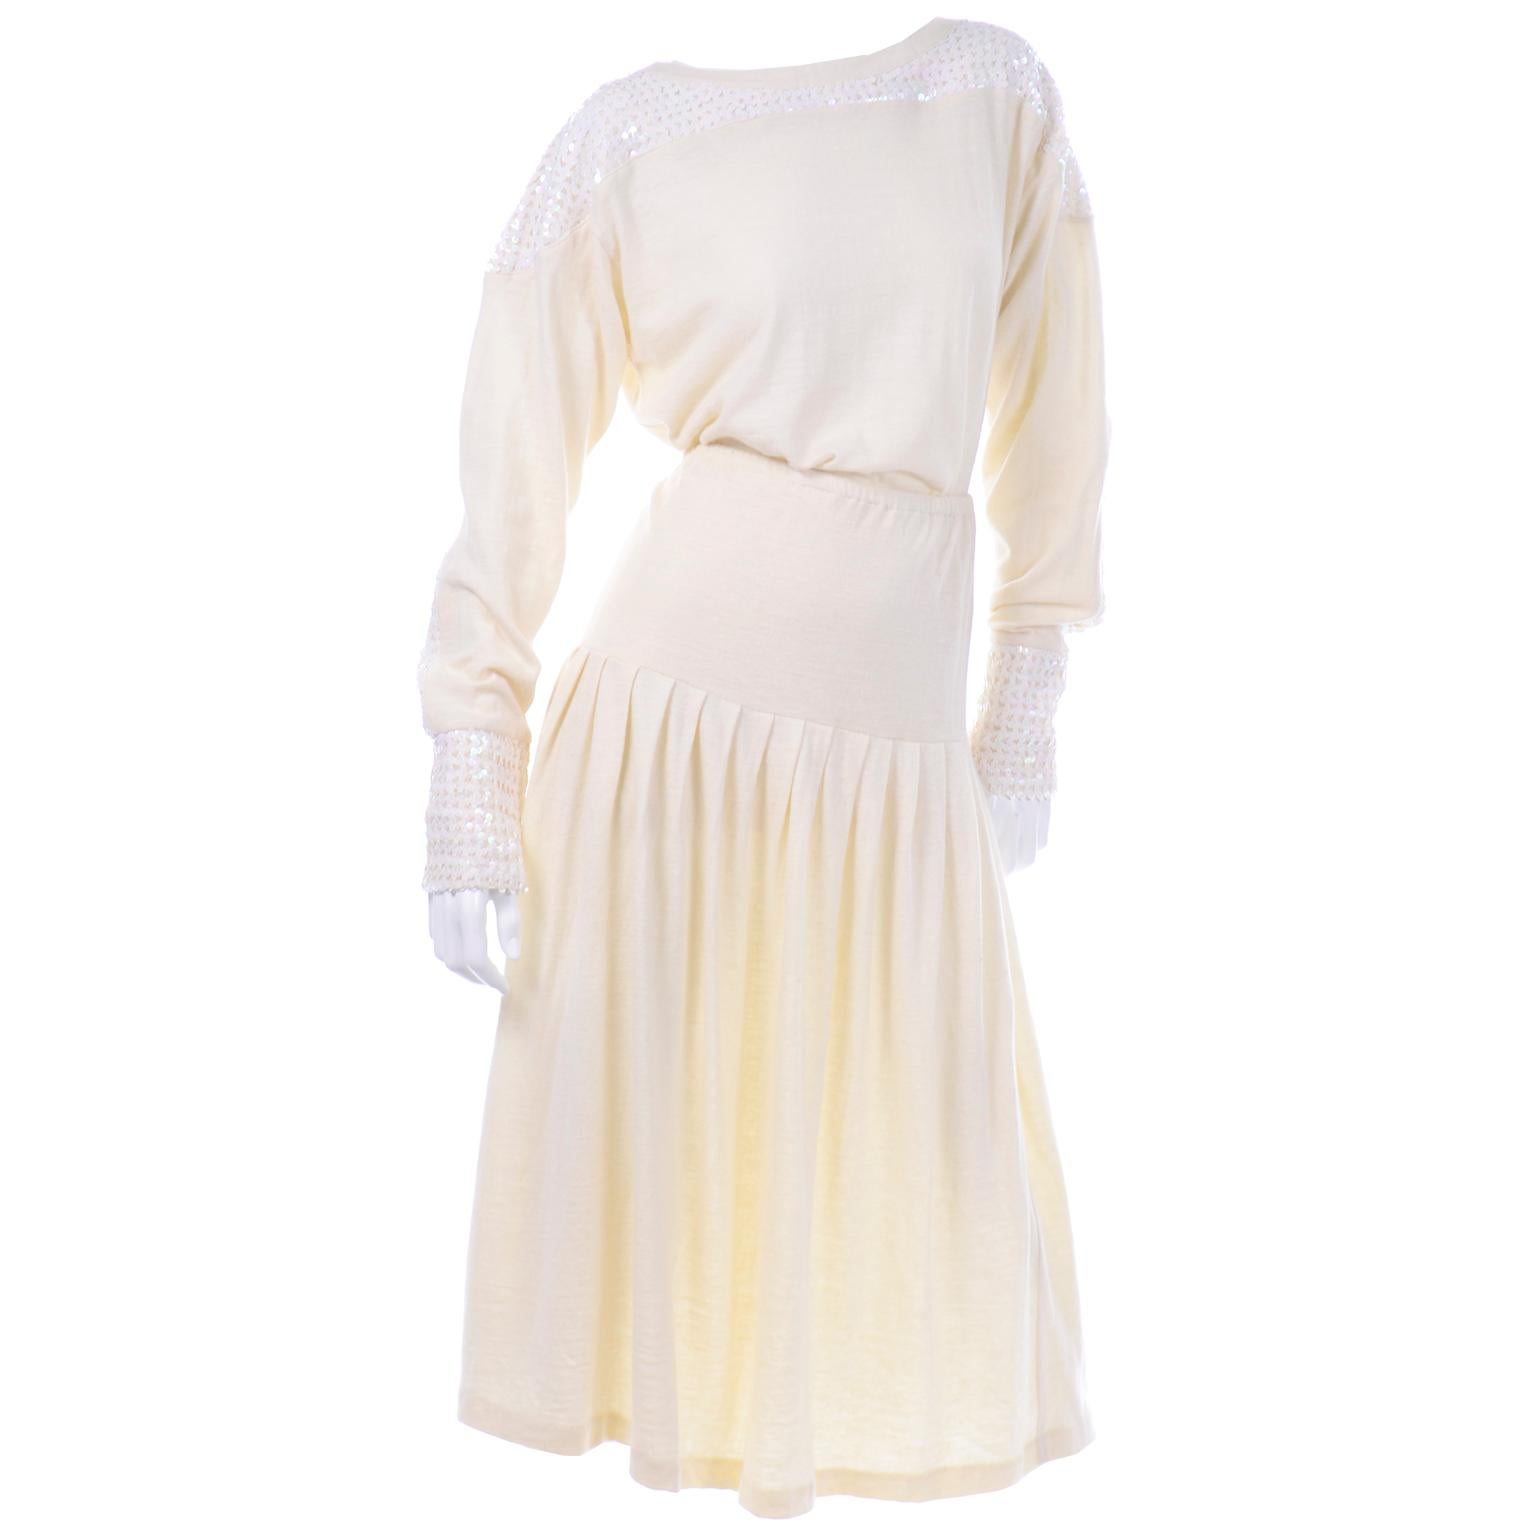 This outstanding vintage avant garde Gene Ewing ensemble came from an estate we acquired that included some of the best designers from the 1970's and 1980's. This outfit has the rare white Gene Ewing label and is made of creamy winter white 50%